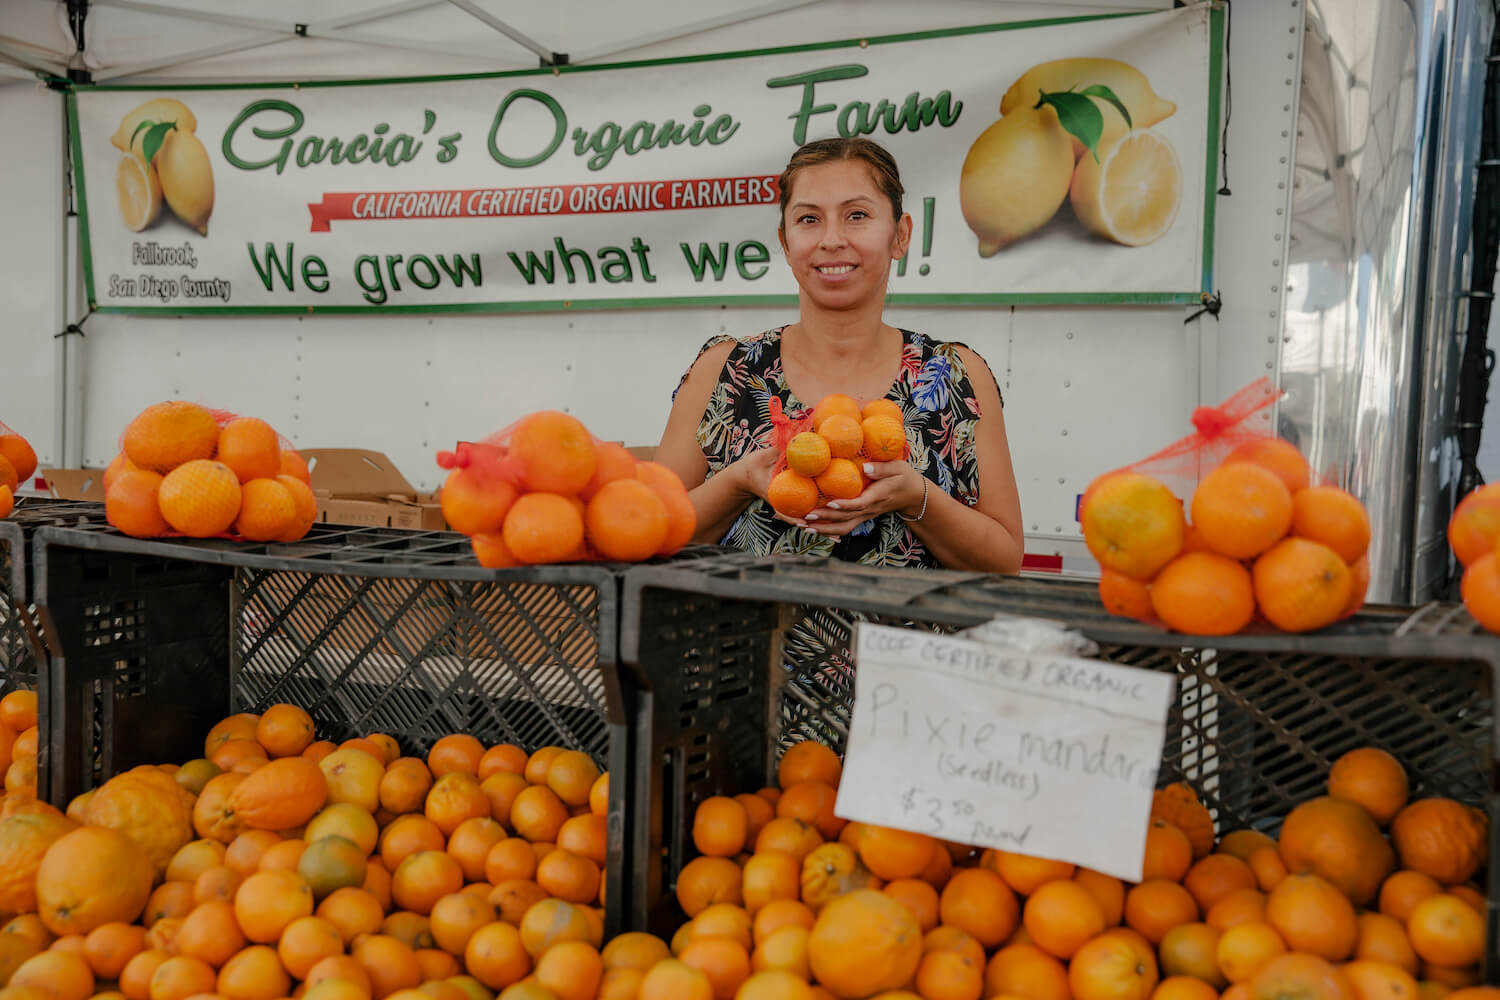 Leticia Garcia stands with Pixie mandarins at their farm stand. August 2021